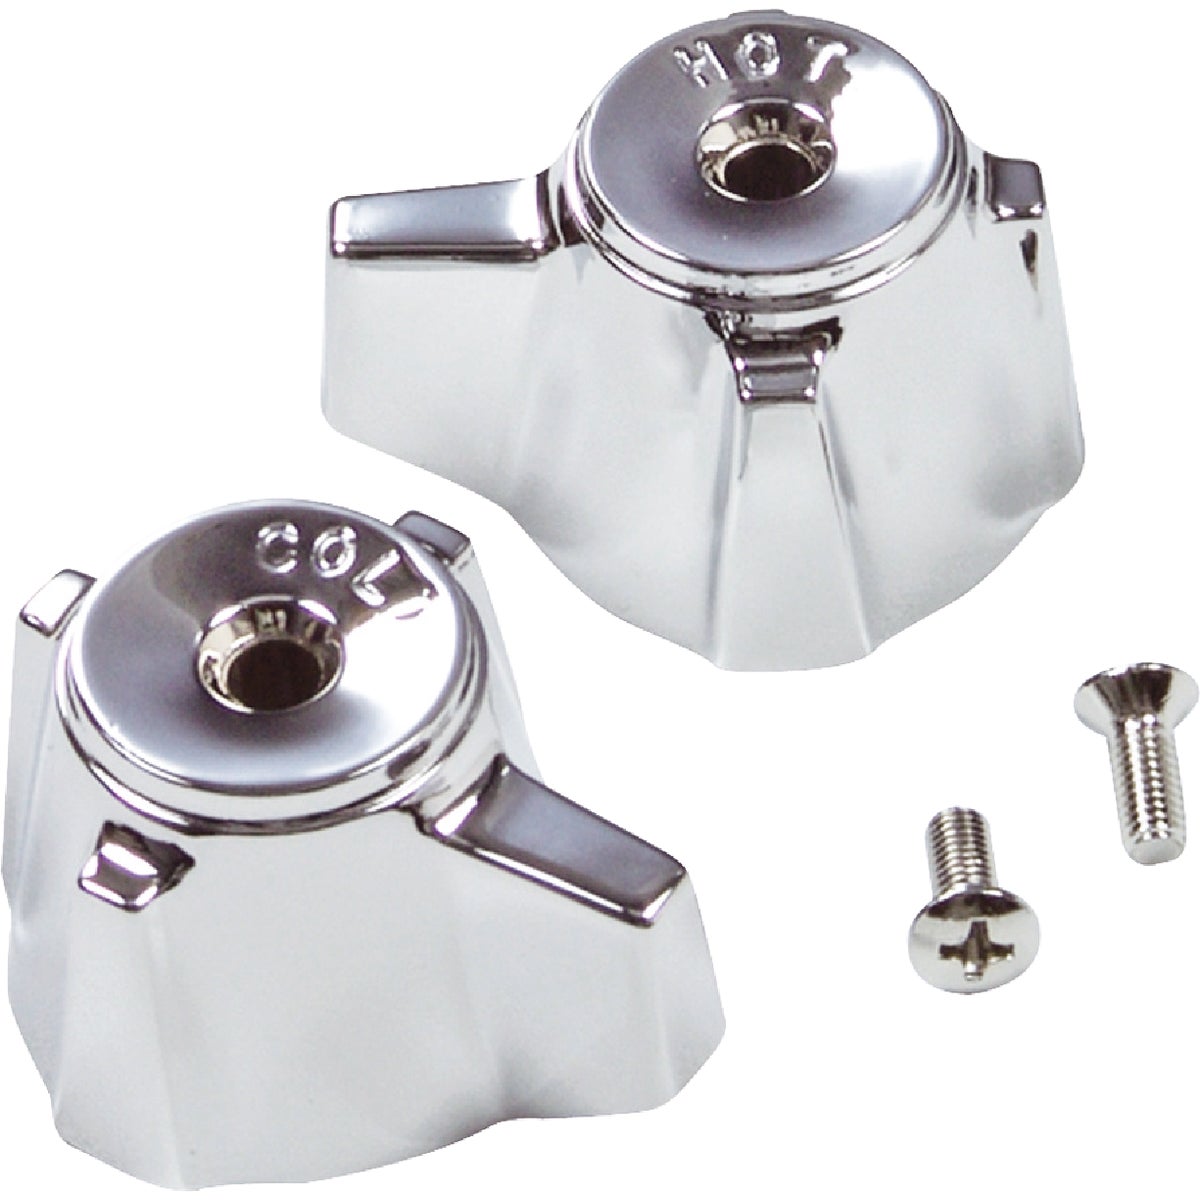 Item 427764, Fits Sterling kitchen and lavatory faucets. Includes stem screw.